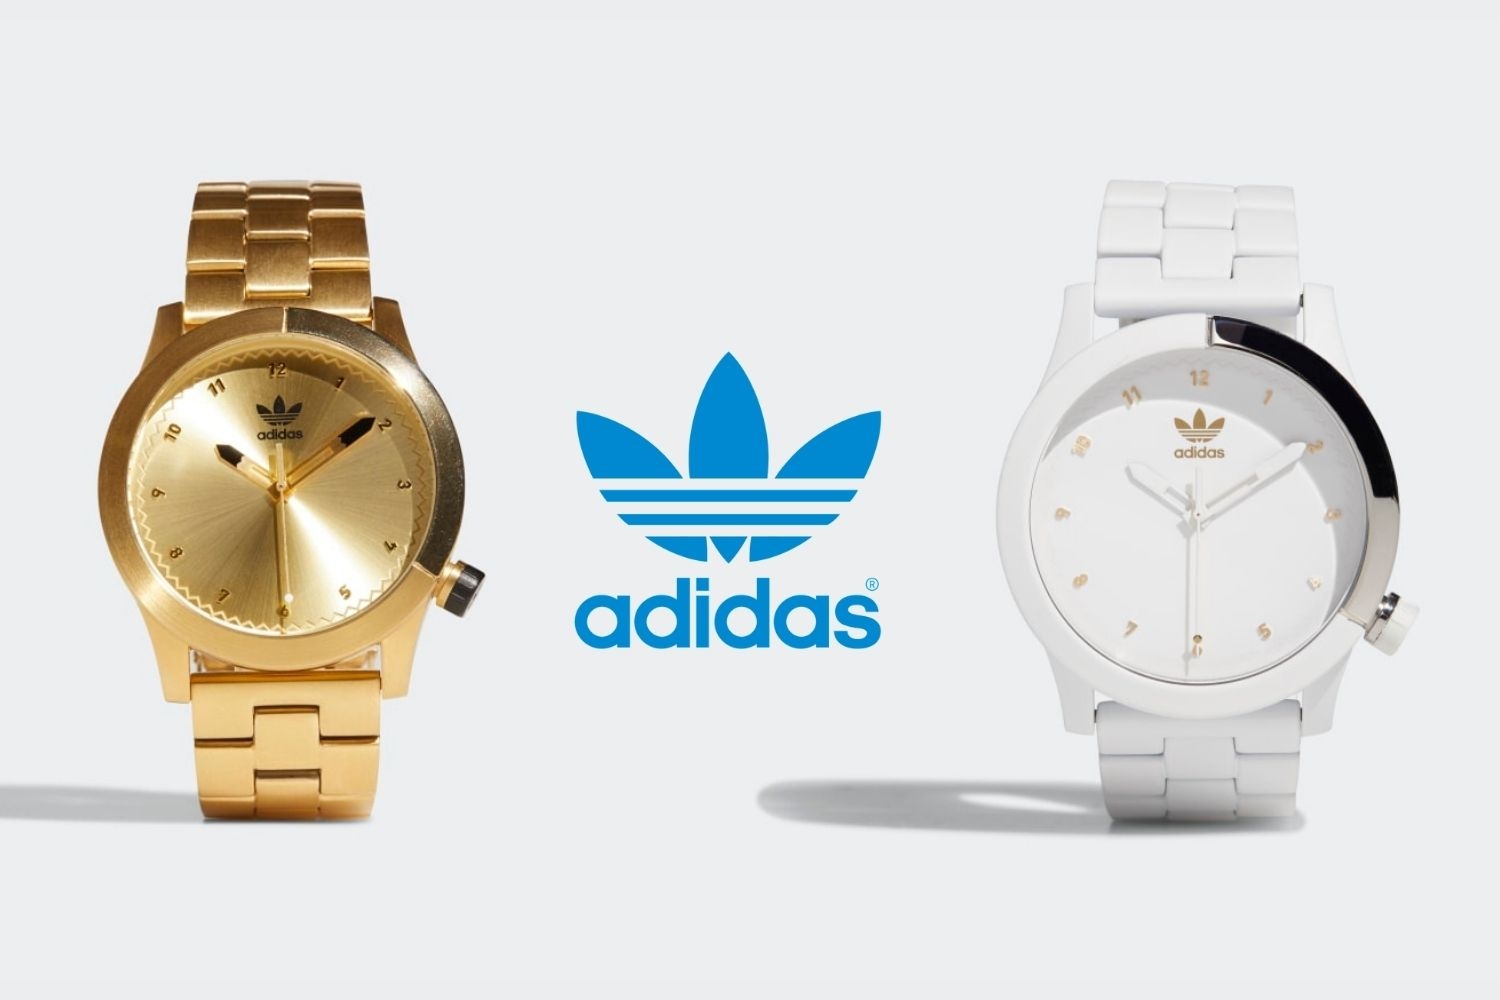 These are our favourite small gifts from adidas